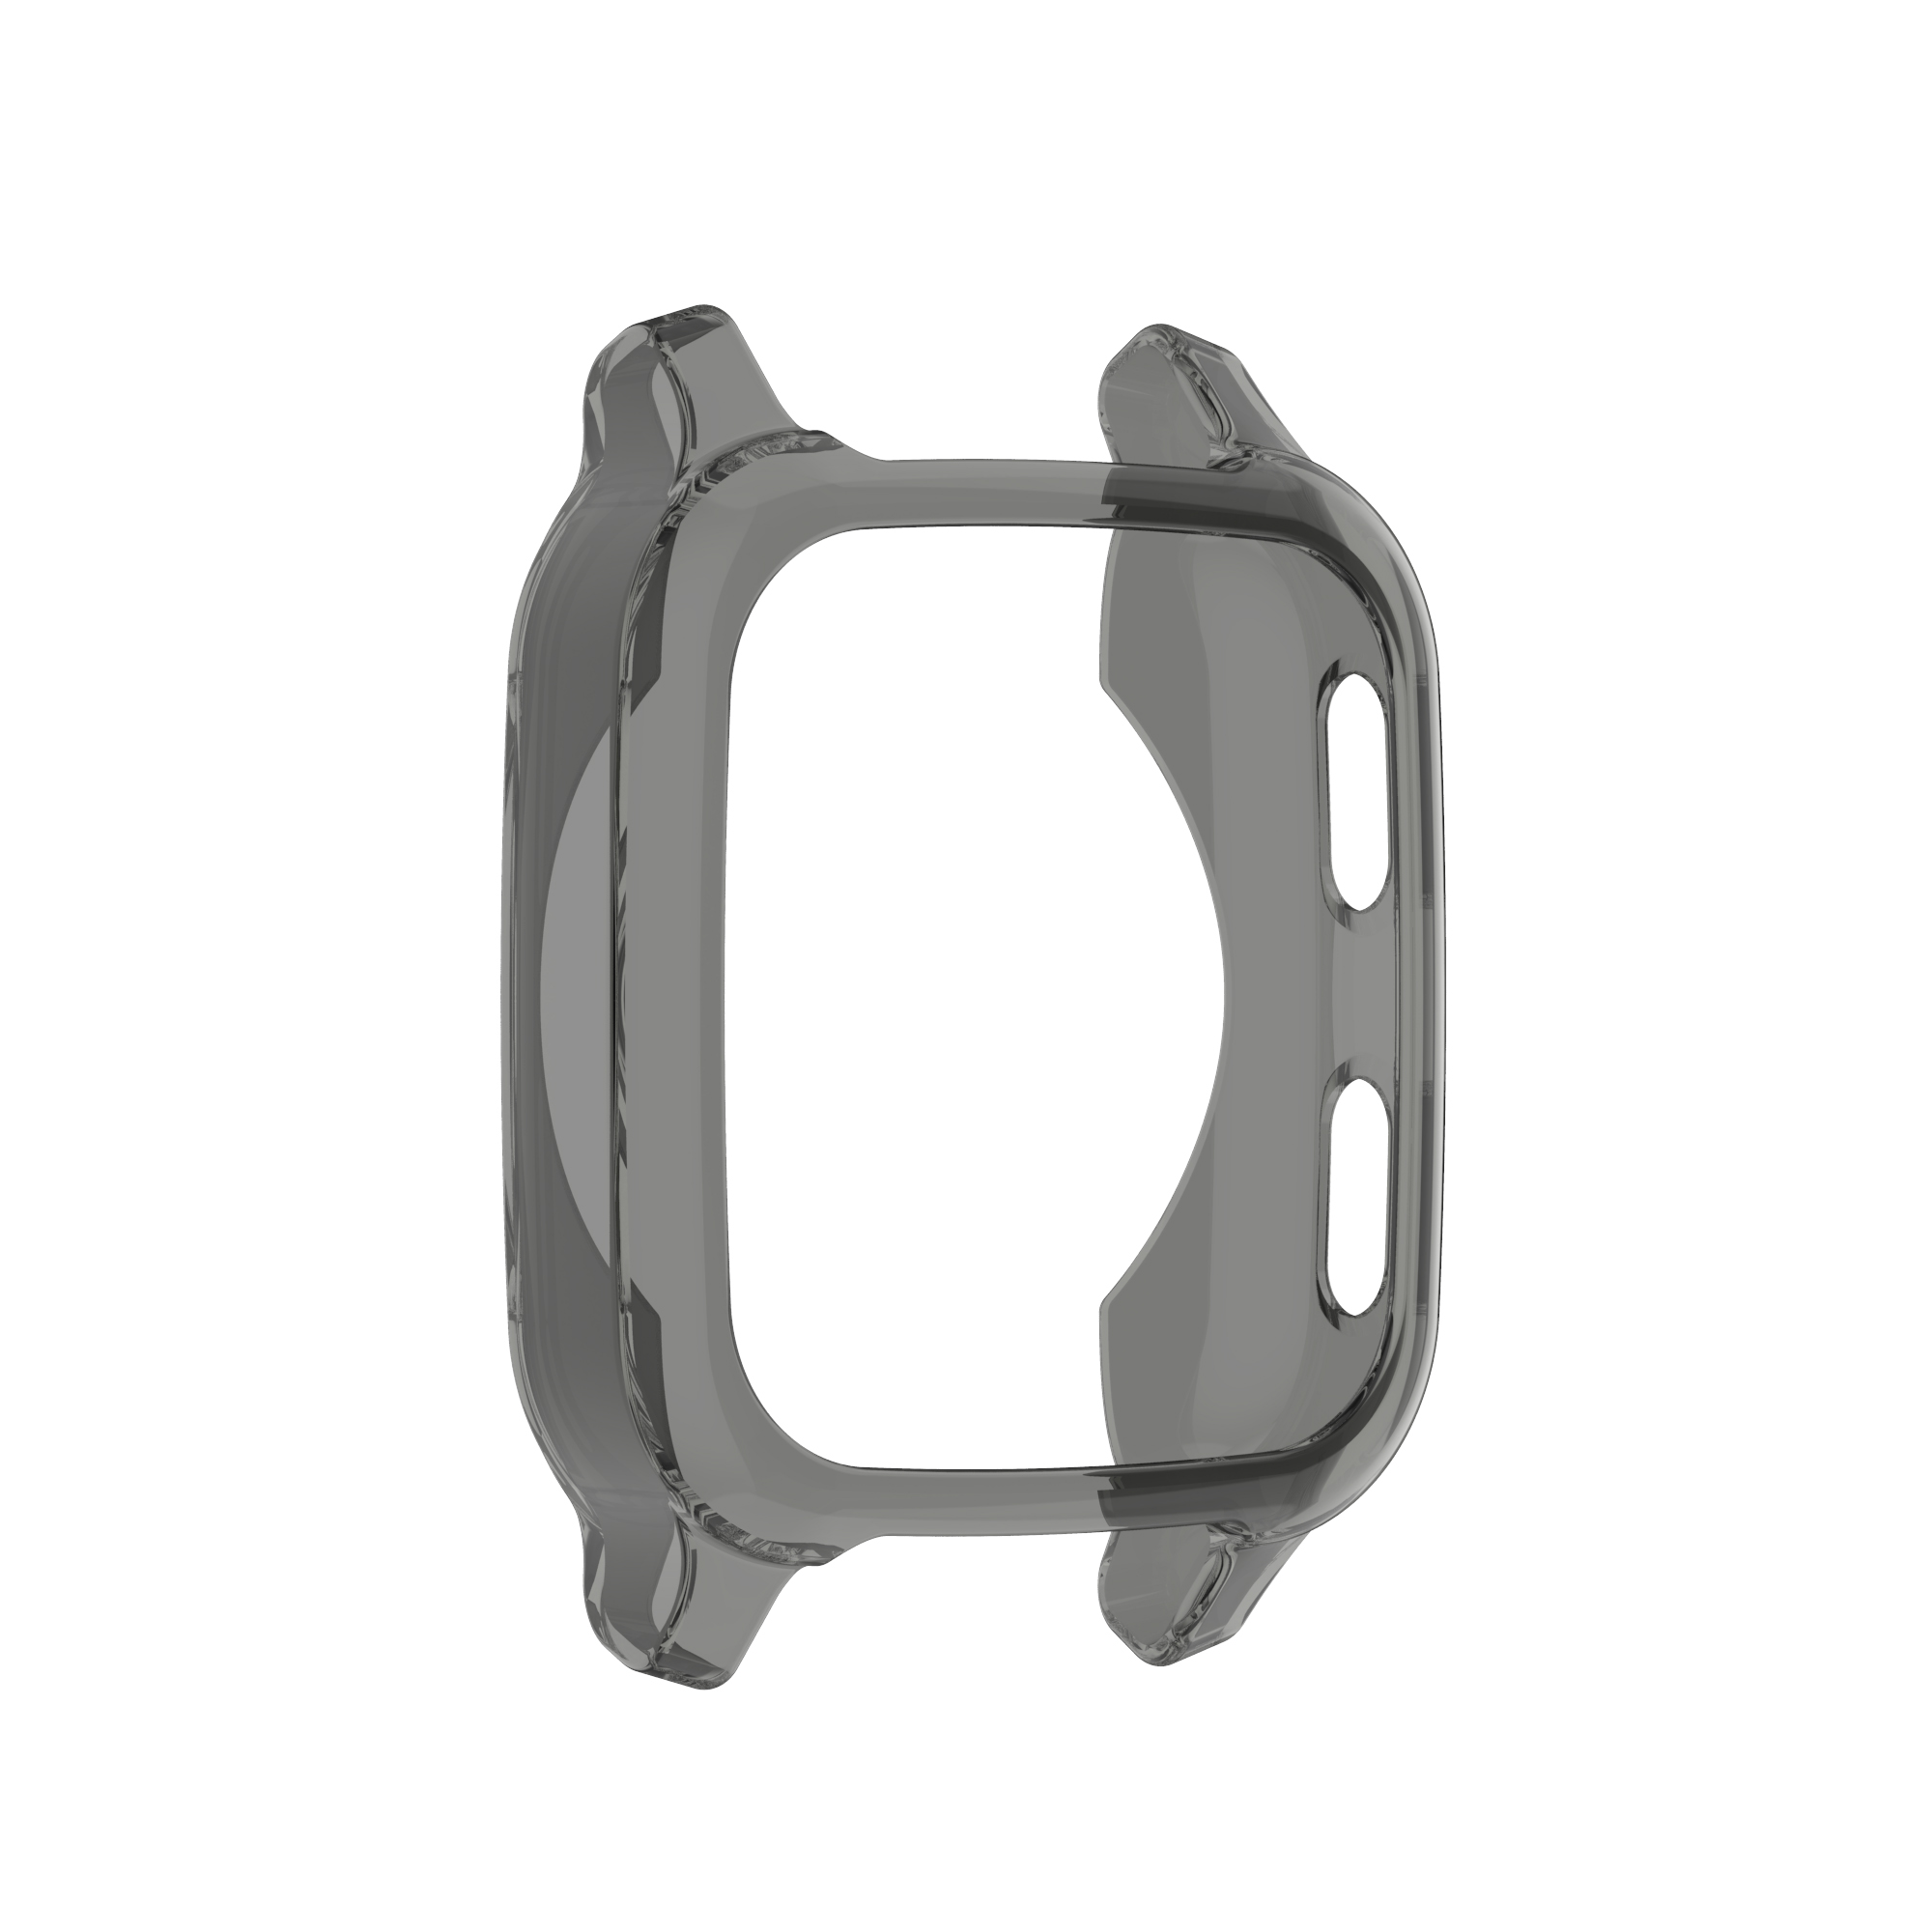 Bakeey-TPU-Transparent-Half-pack-Watch-Case-Cover-Watch-Shell-Protector-For-Garmin-Venu-sq-1791985-2